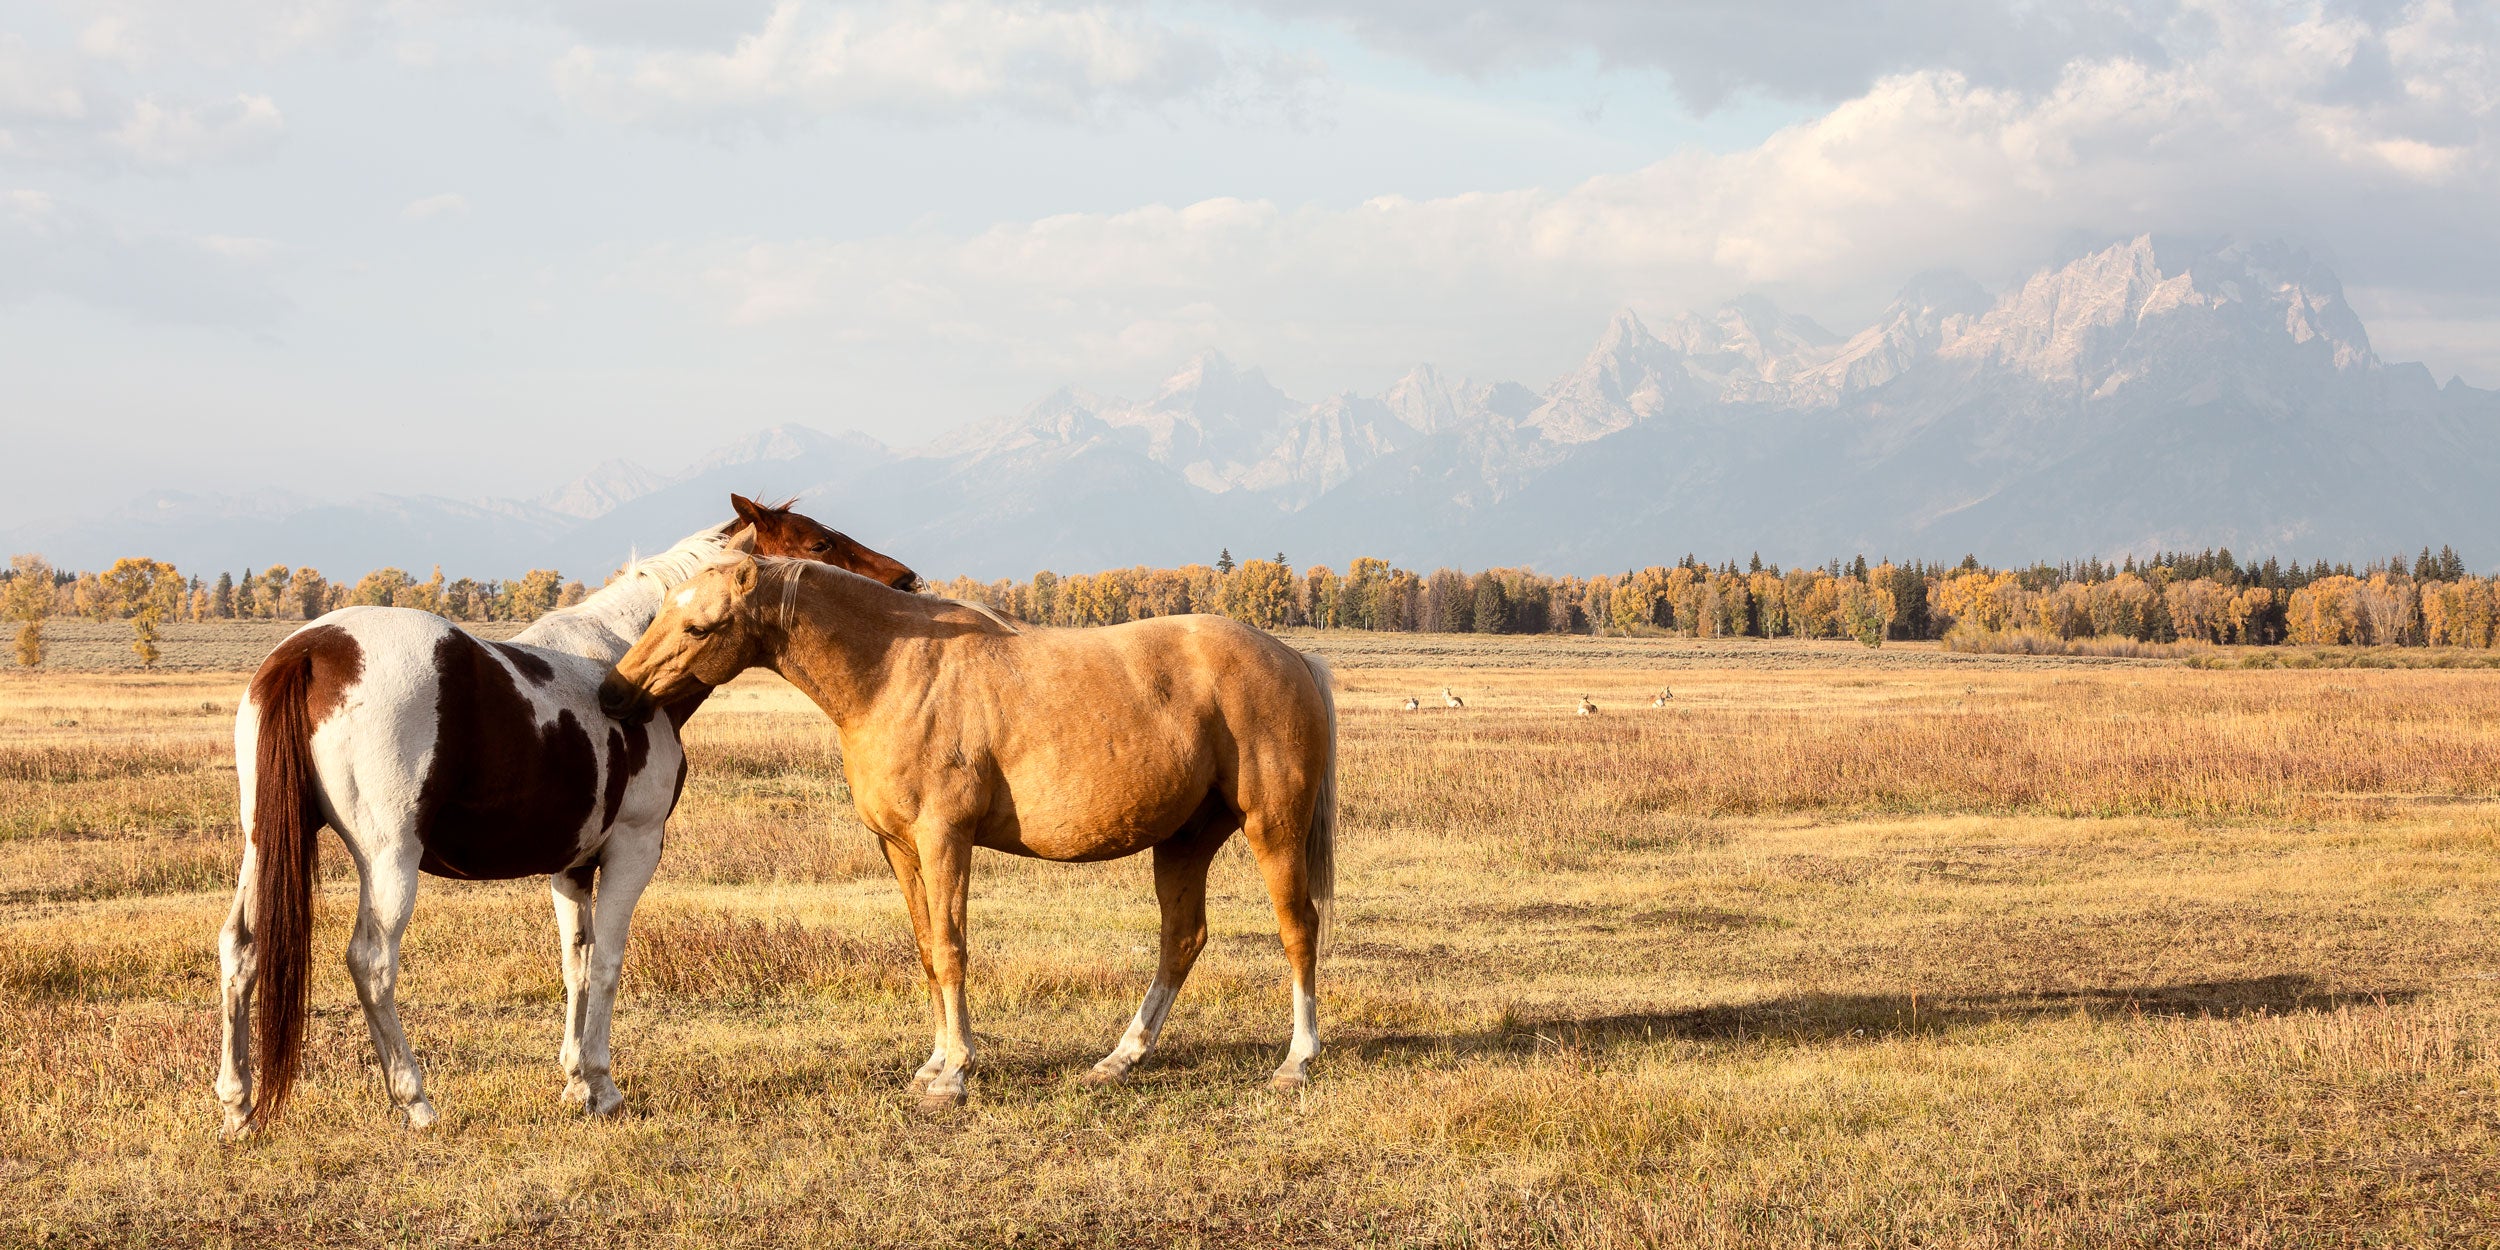 A Lars Gesing fine art nature image of two horses not meant for horseback riding trips in Grand Teton National Park near Jackson Hole, Wyoming, a great place to see wildlife, at the peak of fall colors. The best time to see fall colors in Grand Teton National Park is usually in late September.